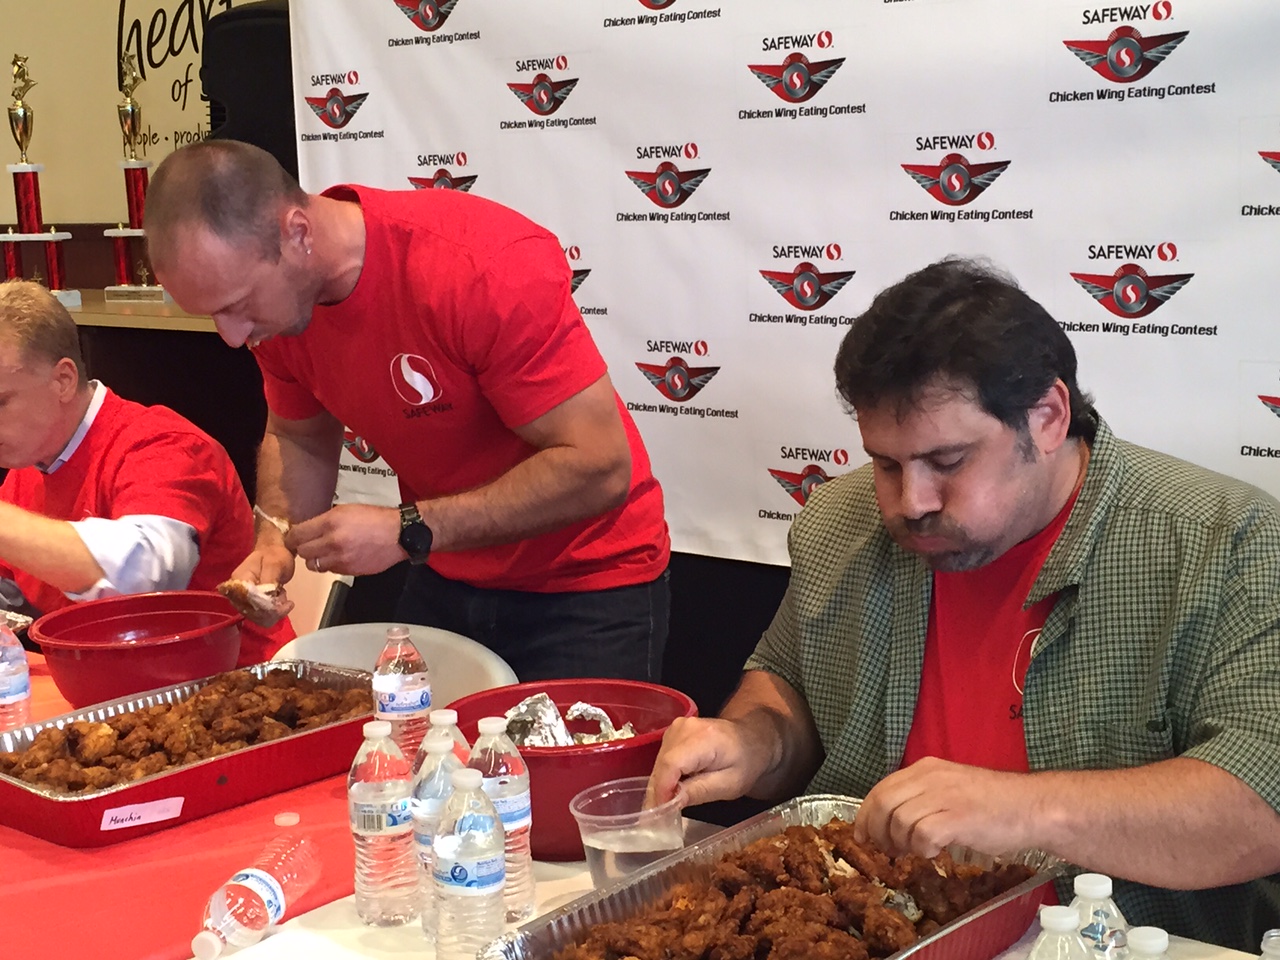 Mike "Munchin" Longo, left, and "Gentlemen" Joe Menchetti in the final moments of the competition. (WTOP/Megan Cloherty)